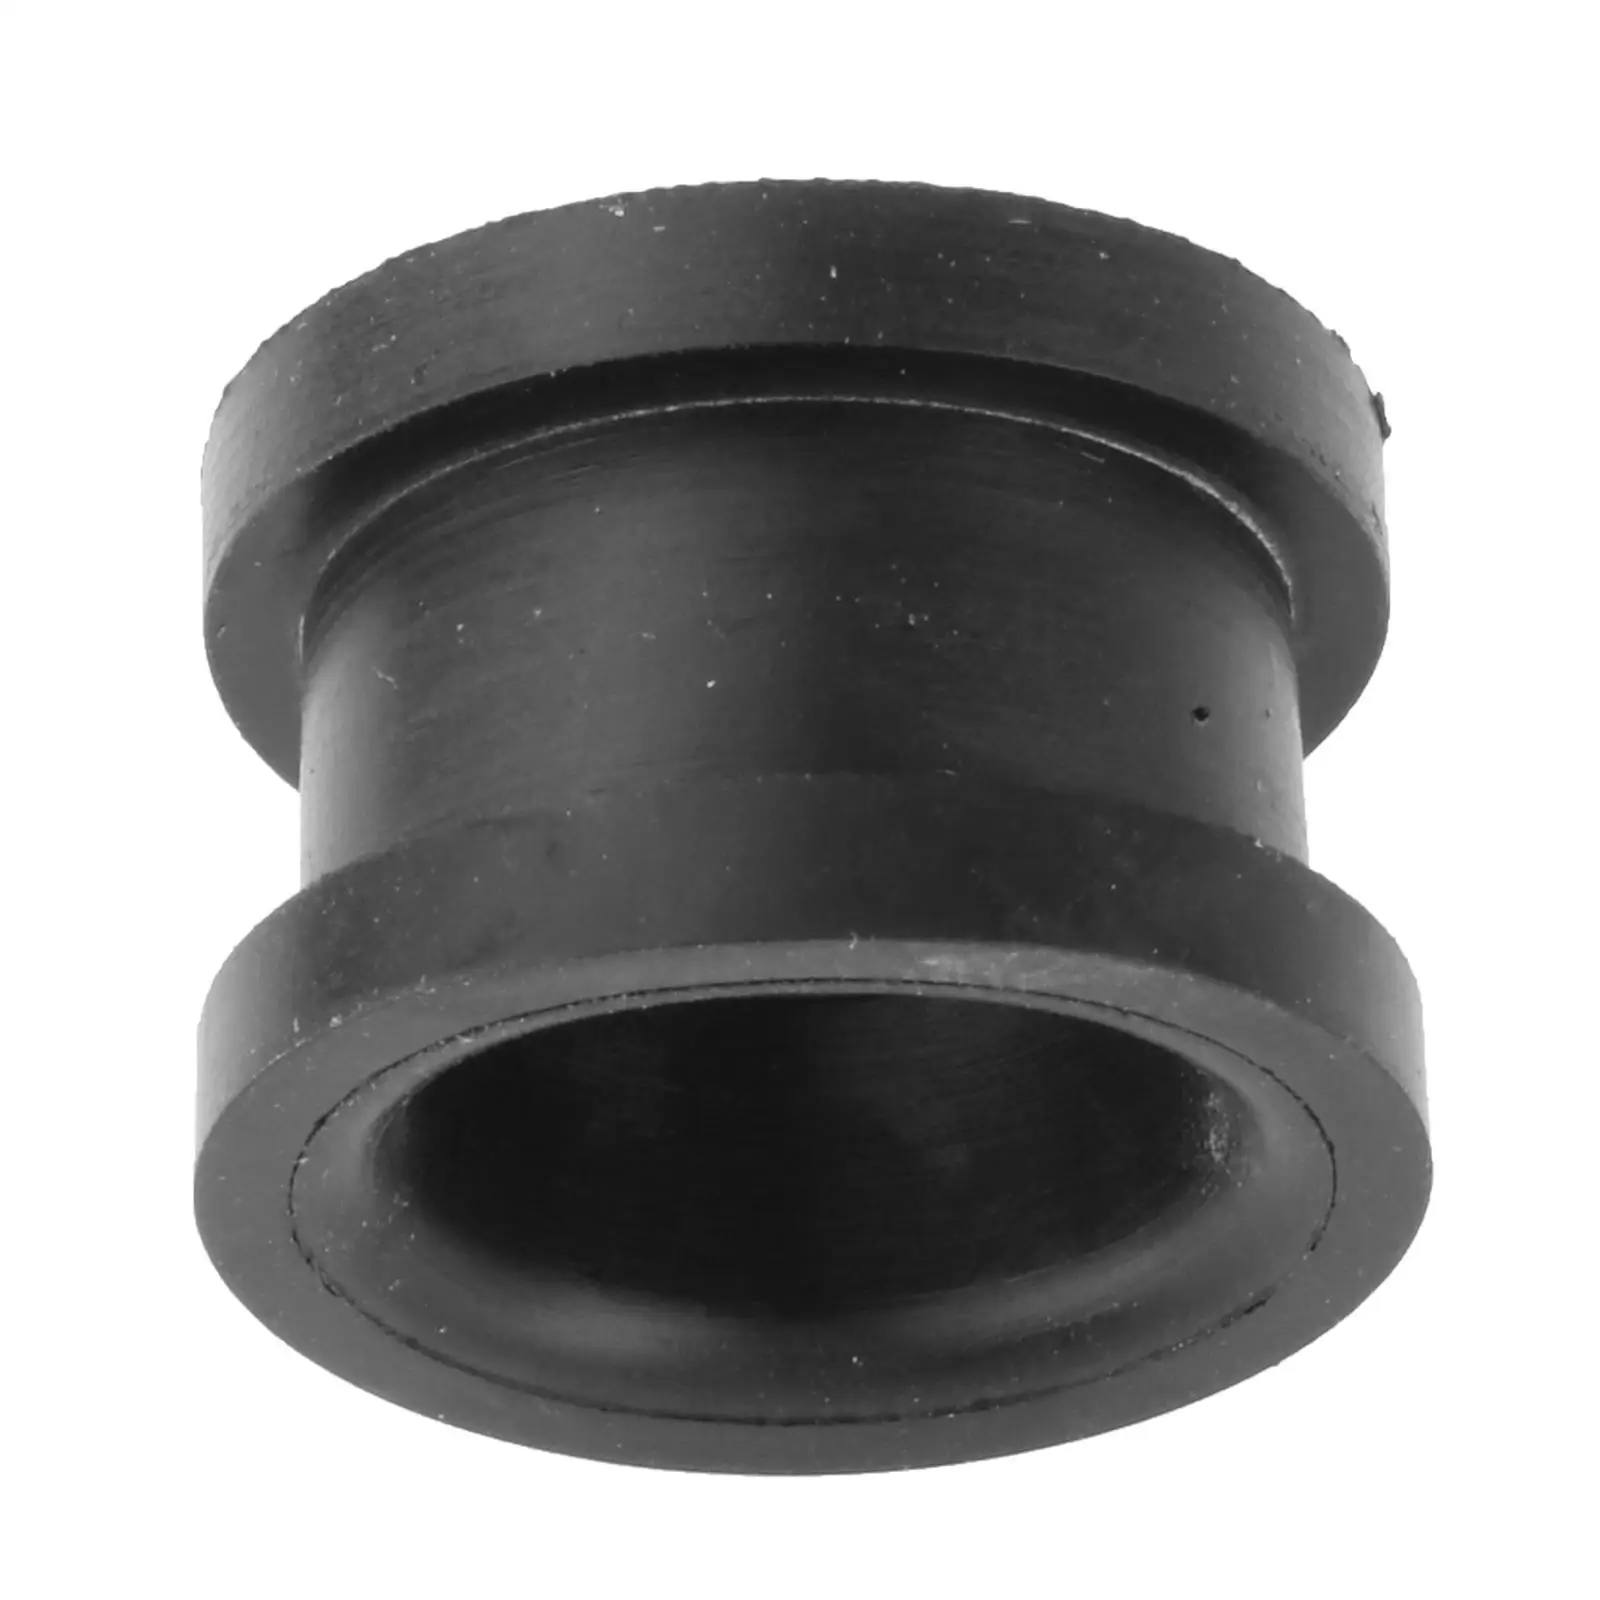  663-44367-00 Rubber Damper 26-81427M Replace for Spare Parts 40HP Outboard Motorcycles Motorbikes